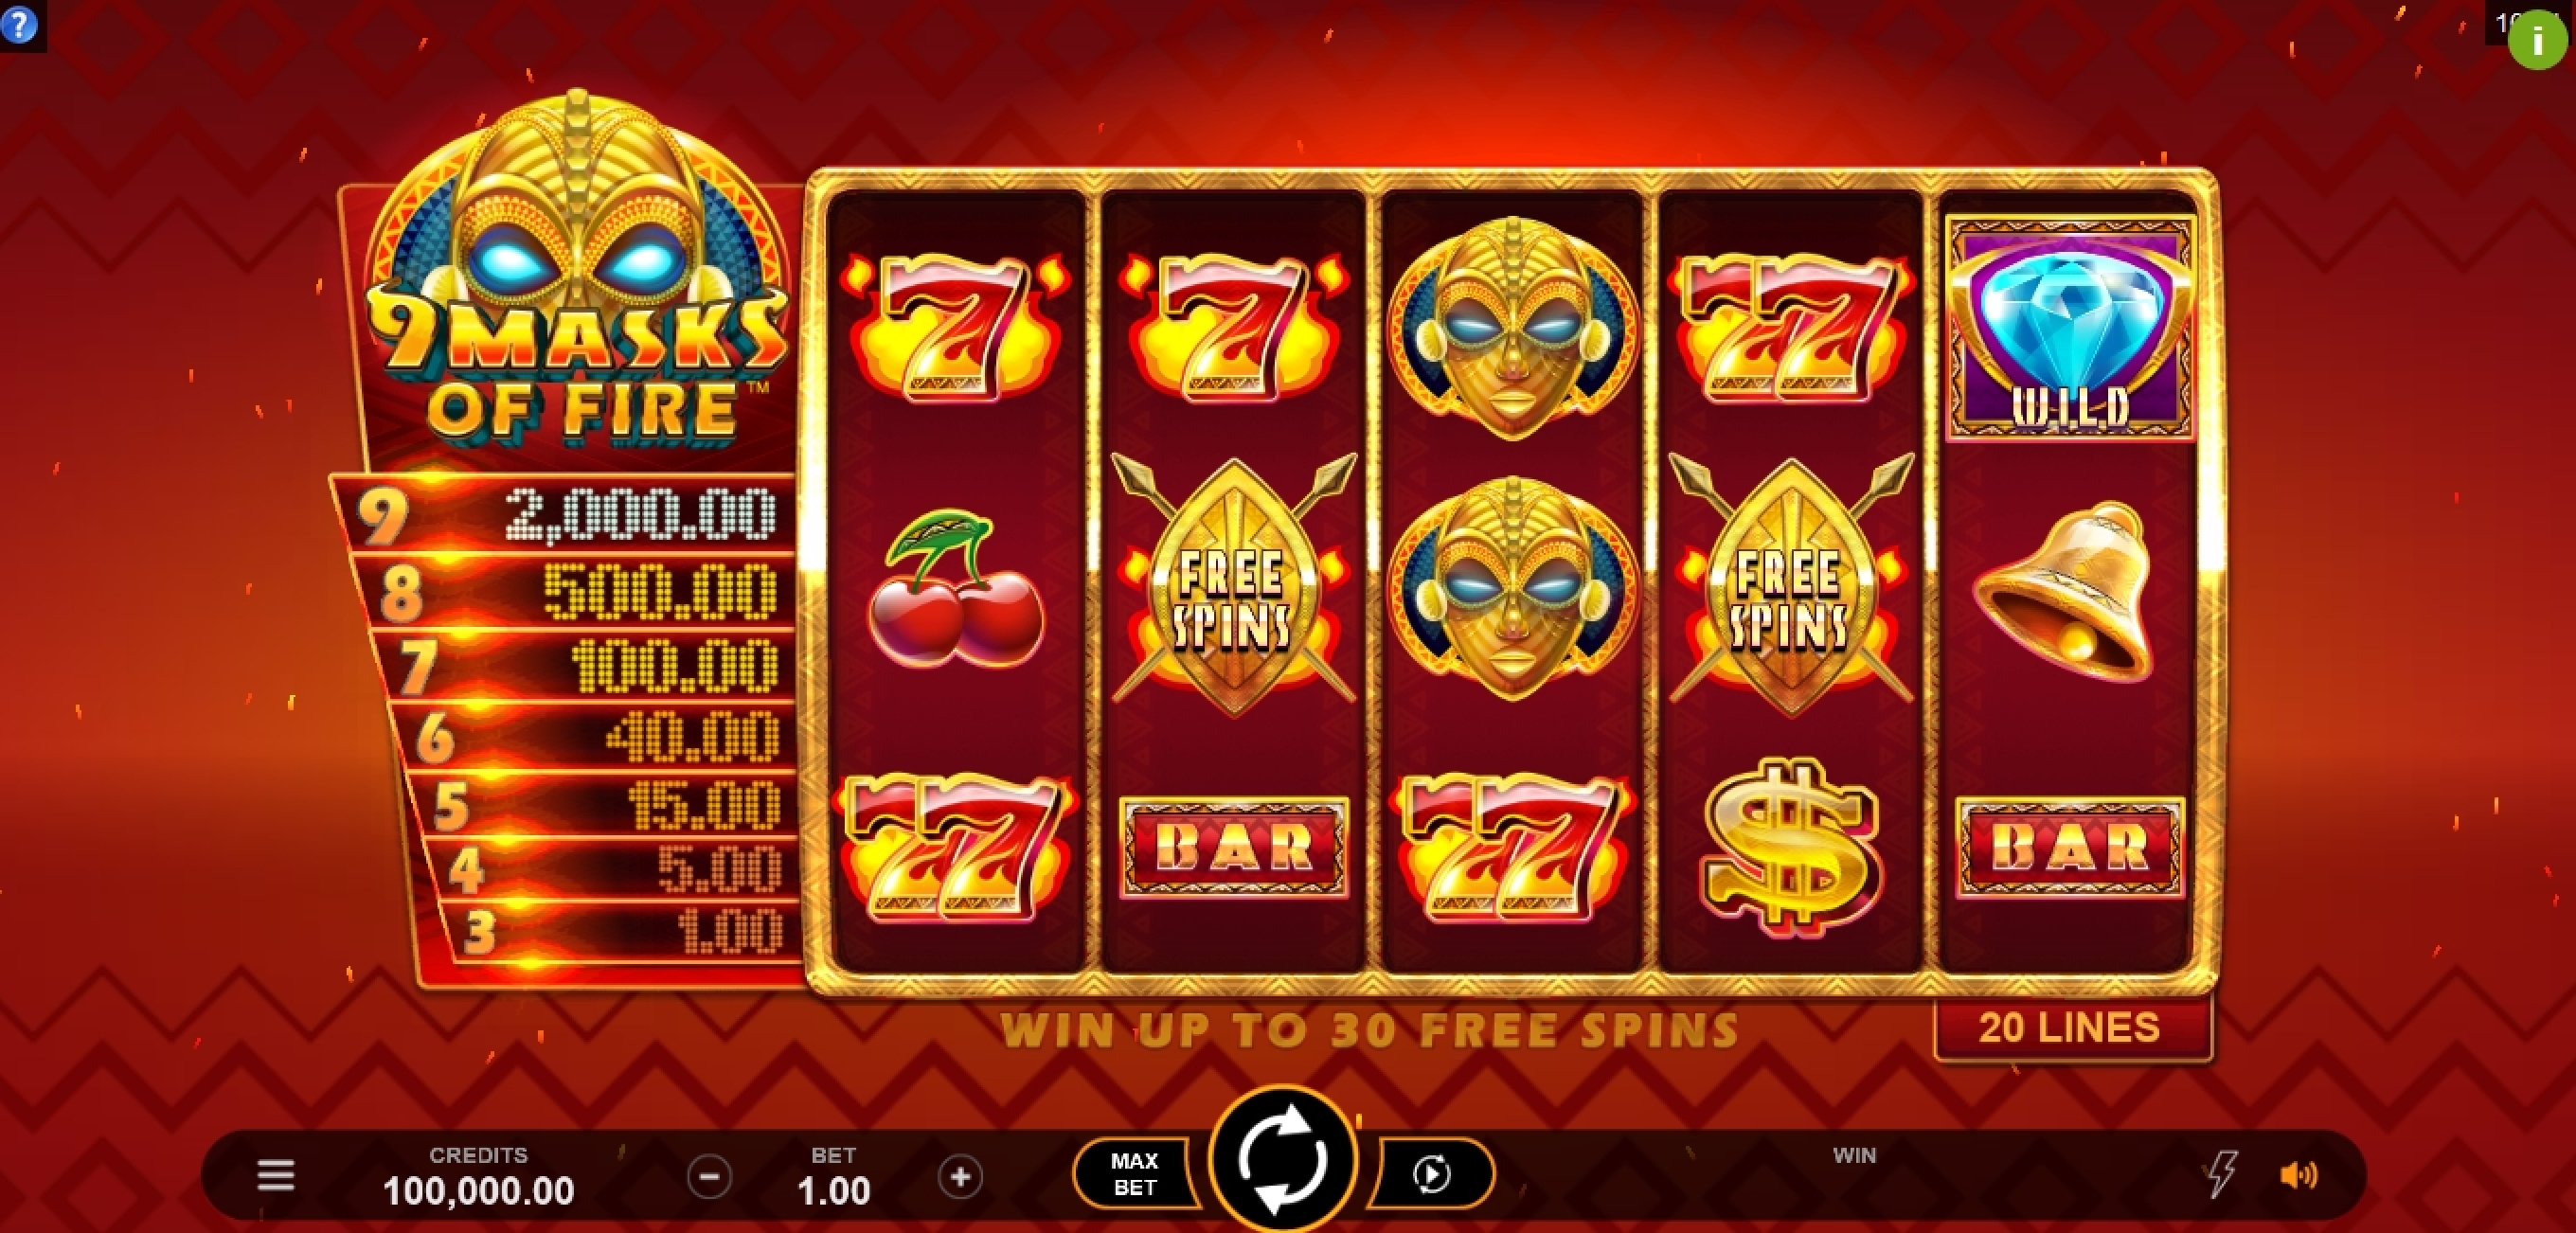 Reels in 9 Masks Of Fire Slot Game by Gameburger Studios